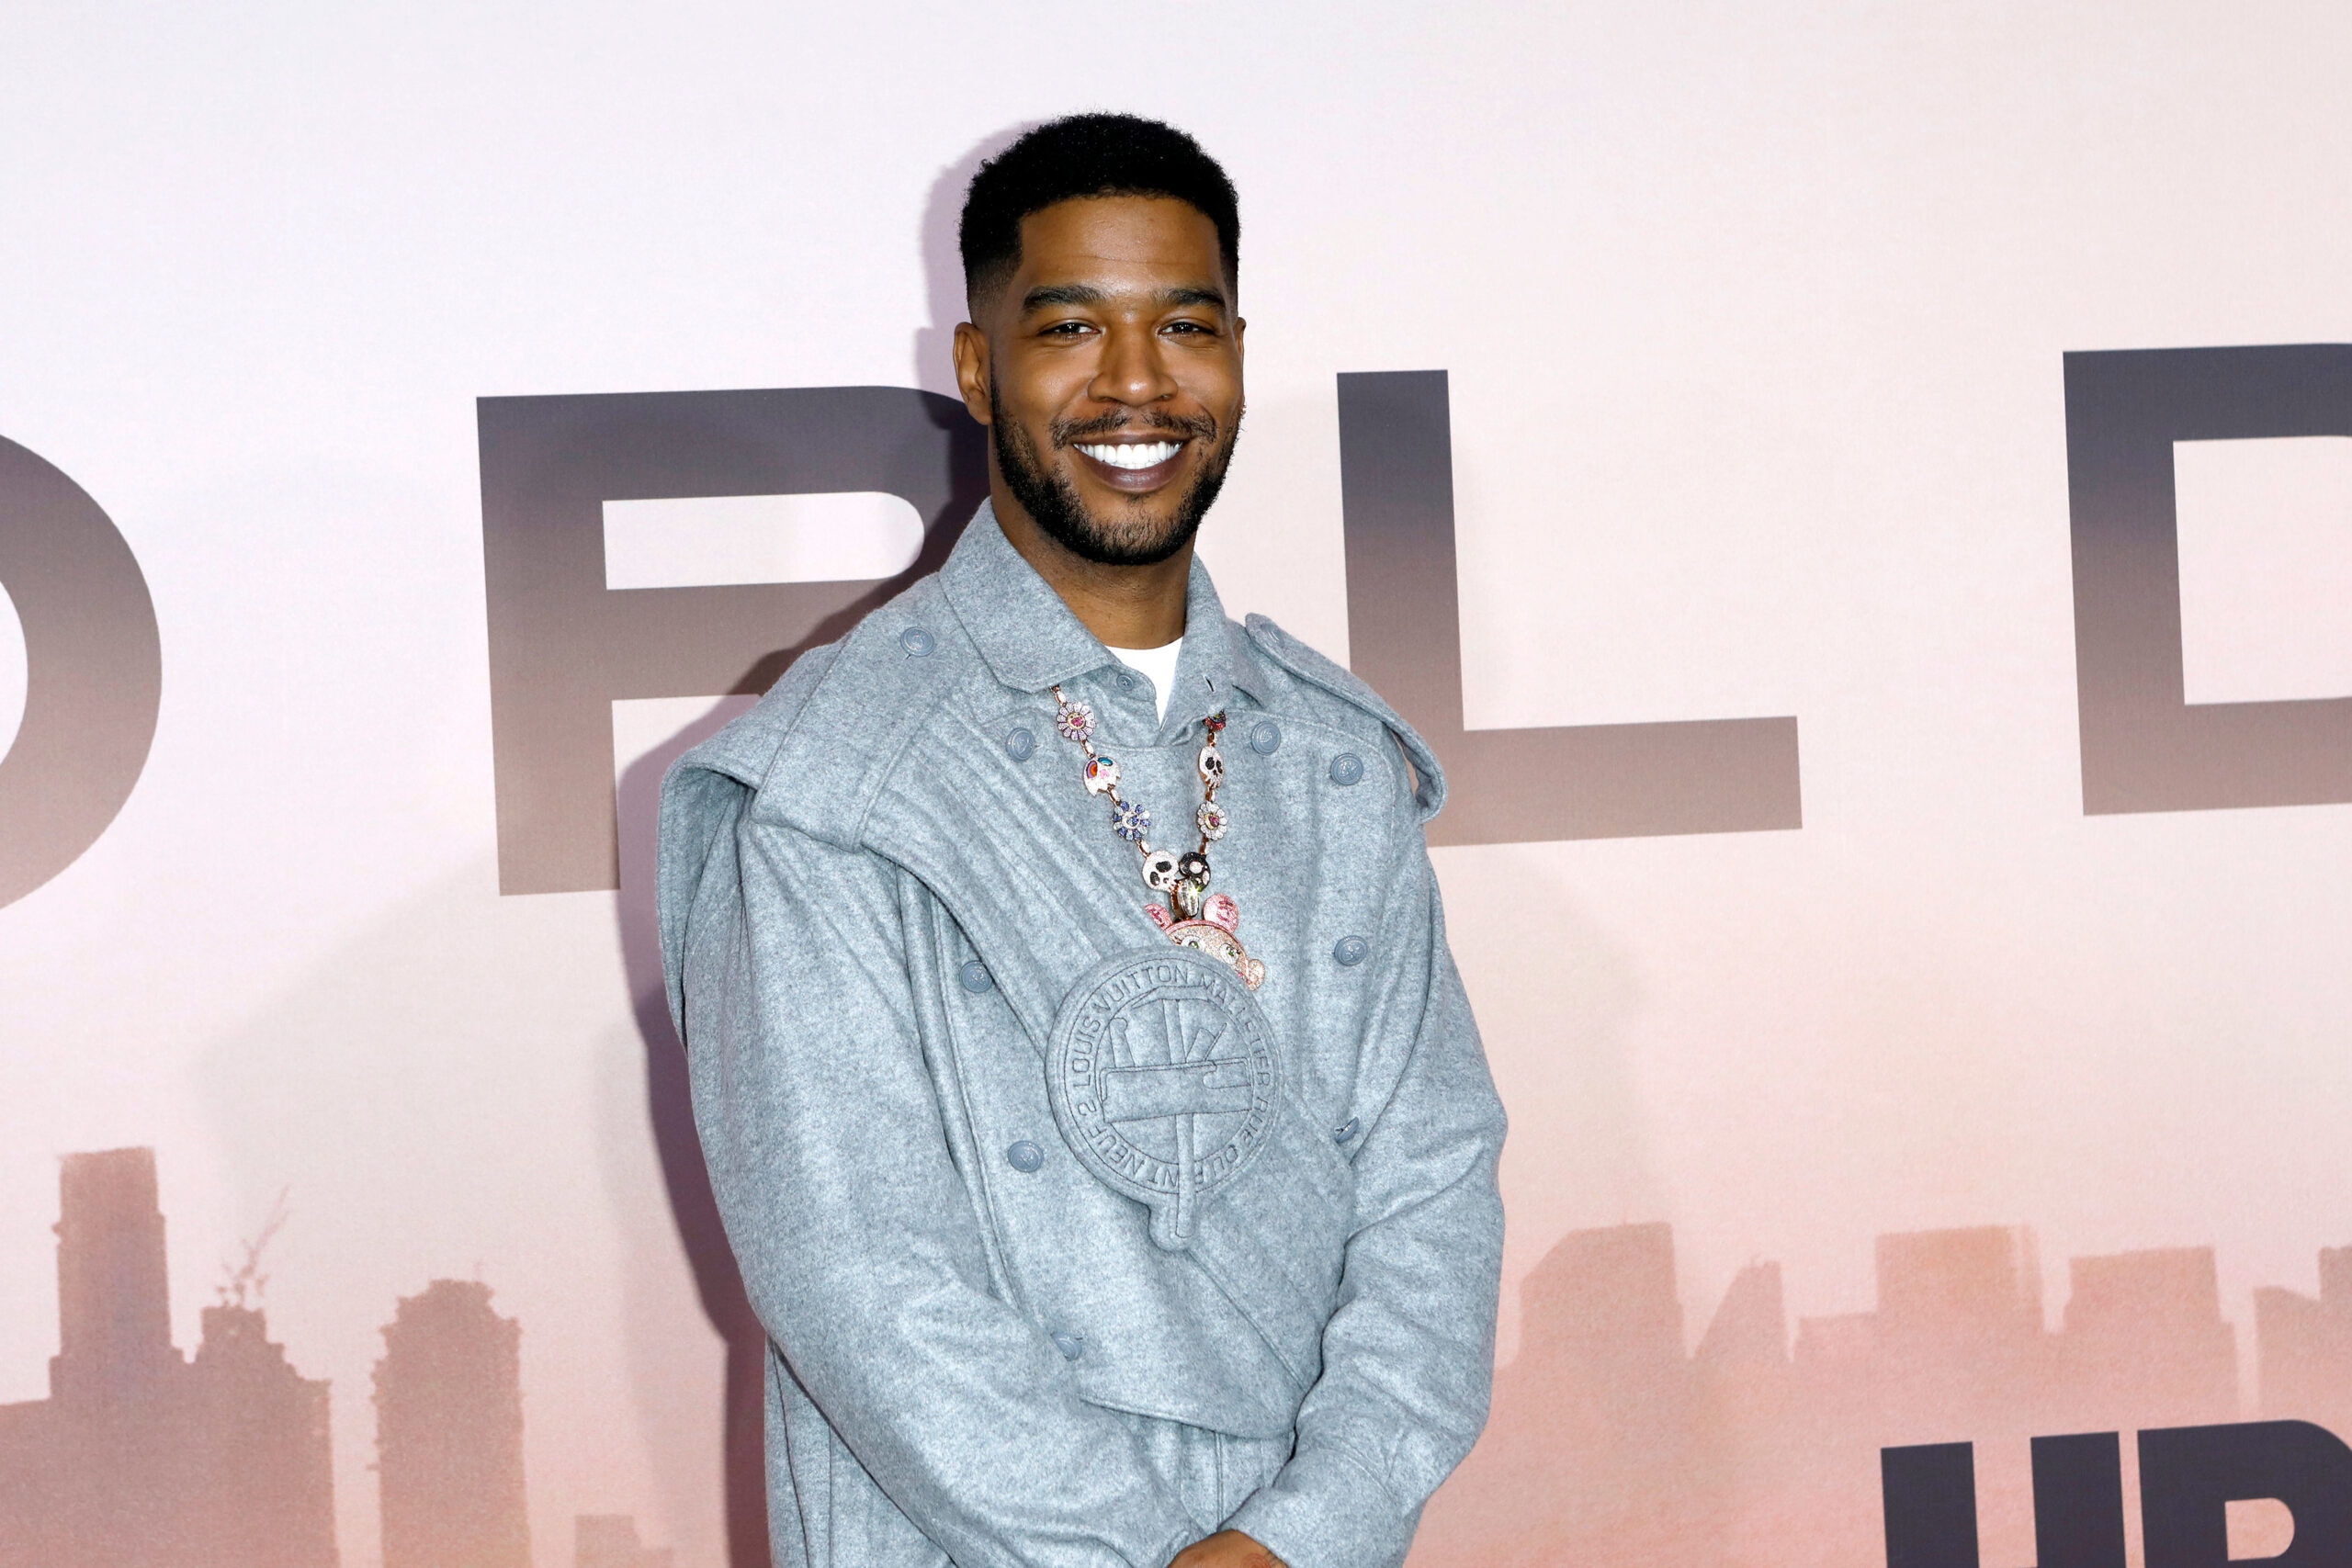 Kid Cudi at the "Westworld" Season 3 Premiere at the TCL Chinese Theater IMAX on March 5, 2020 in Los Angeles.